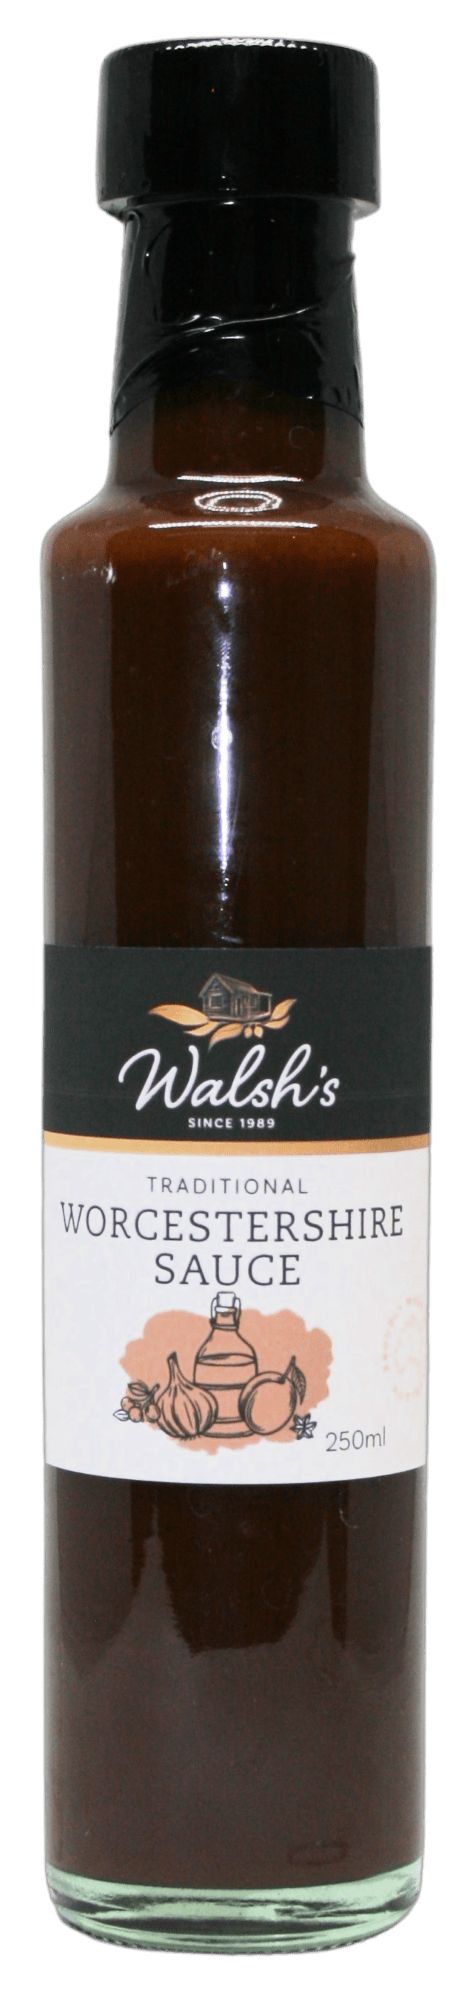 Walshs Worcestershire Sauce